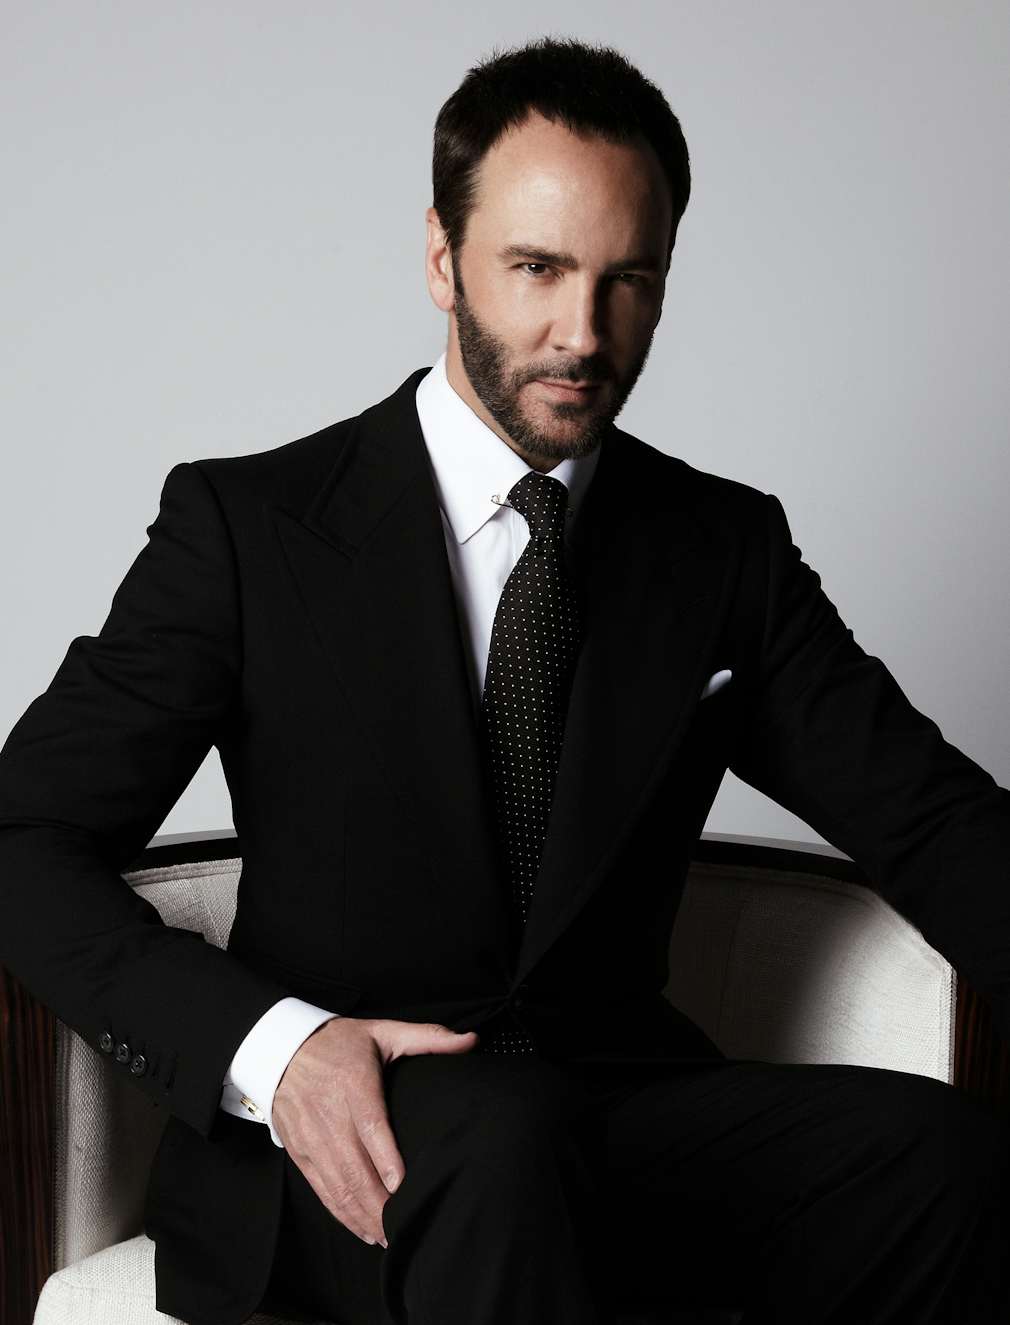 Tom Ford is CFDA's Next Chairman | News | CFDA